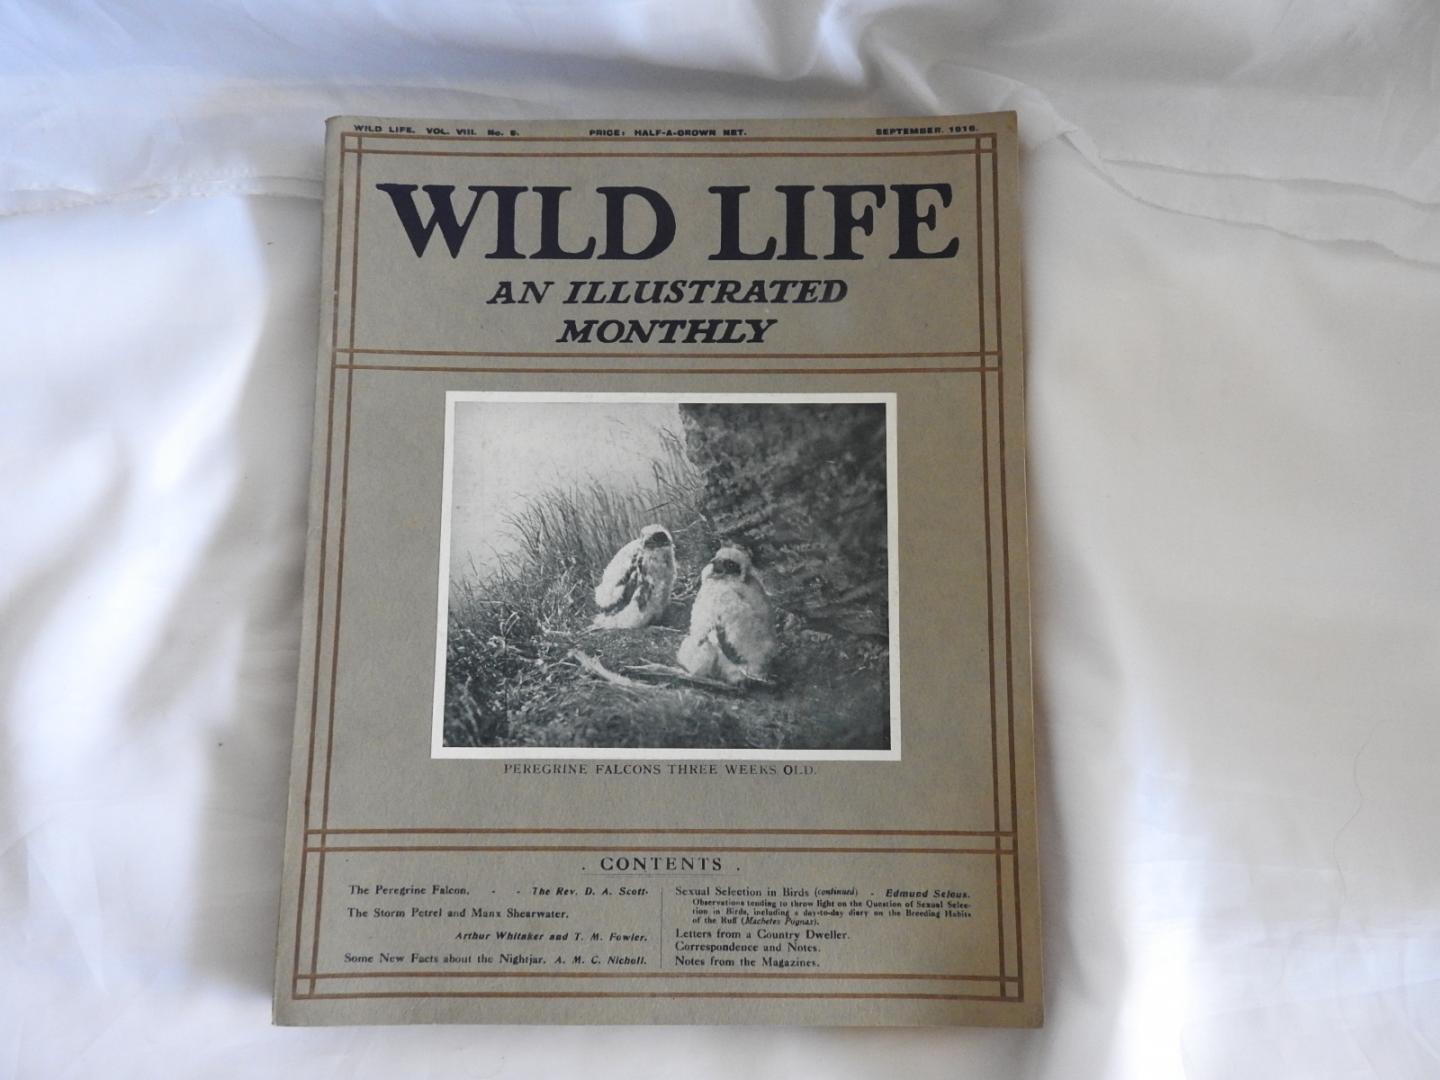 Douglas English - Wild life : an illustrated monthly. Wildlife 1913 - 1914 - 1915 - 1916. COMPLETE